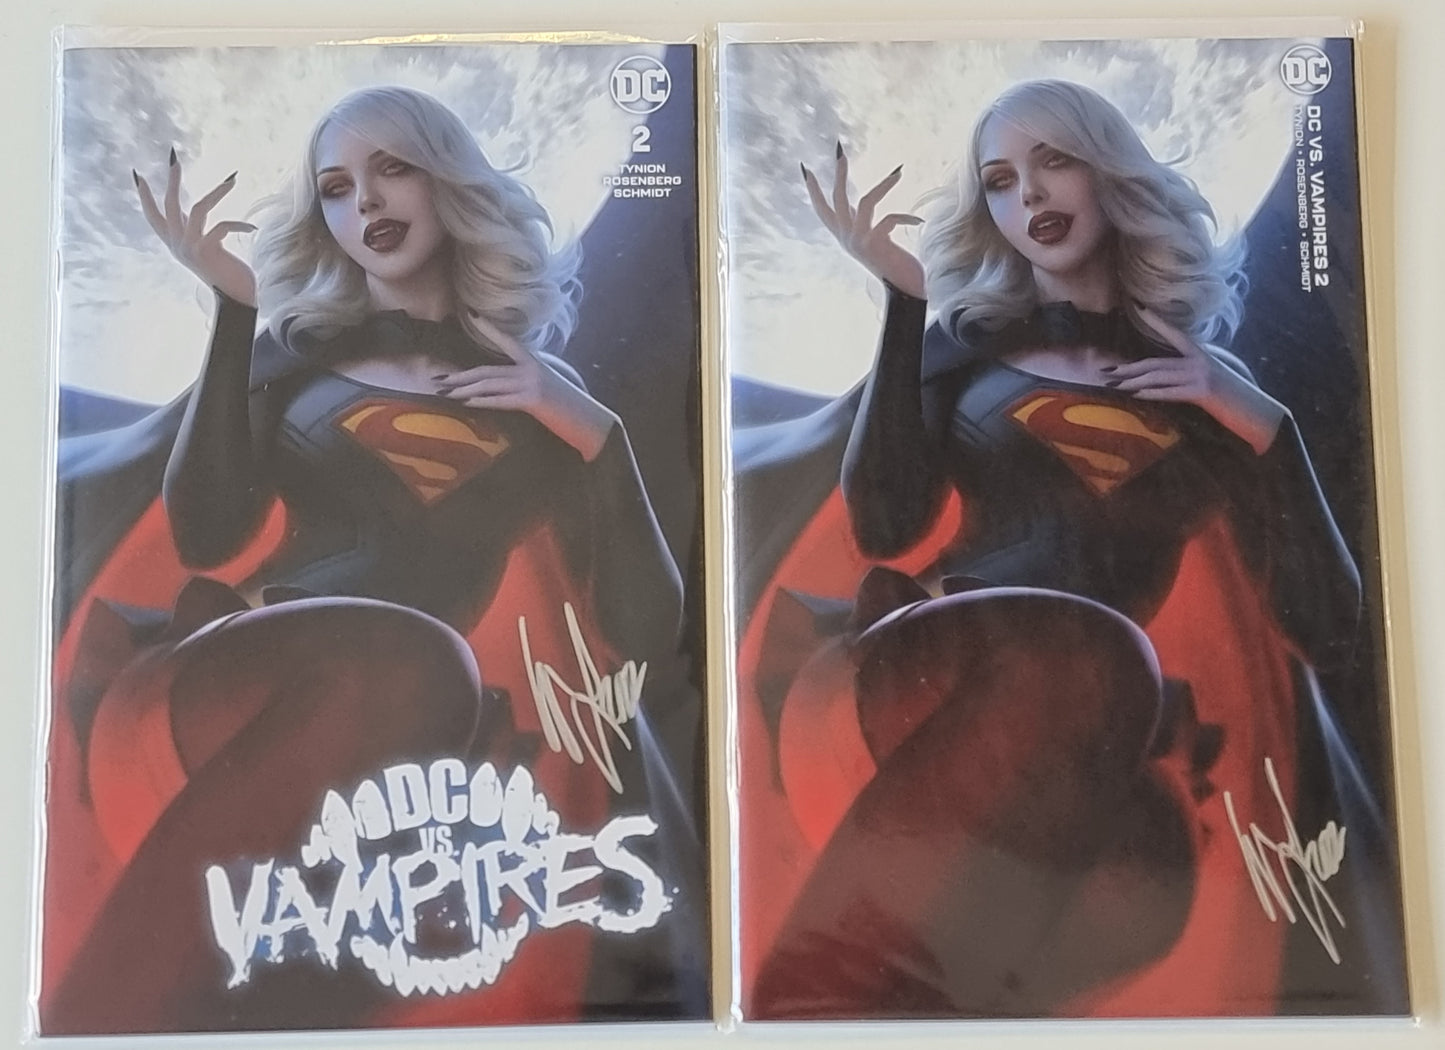 DC VS VAMPIRES #2 WARREN LOUW TRADE/MINIMAL TRADE DRESS VARIANT SET LIMITED TO 1500 SETS SIGNED BY WARREN LOUW WITH COA